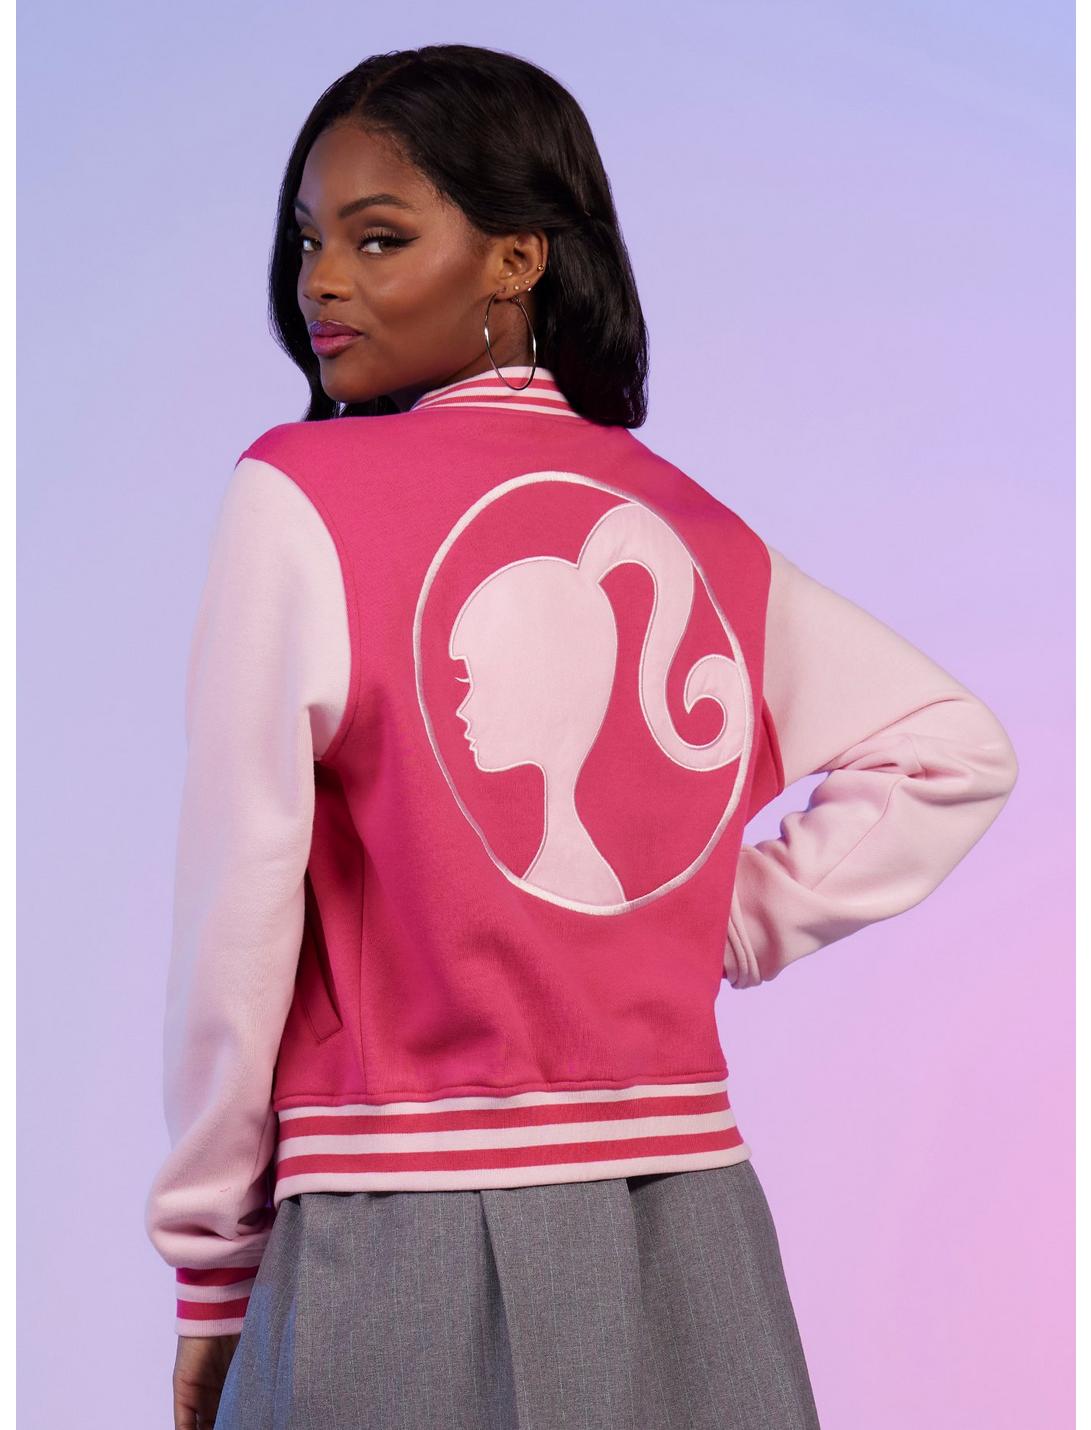 Barbie Embroidered Girls Varsity Jacket Hot Topic